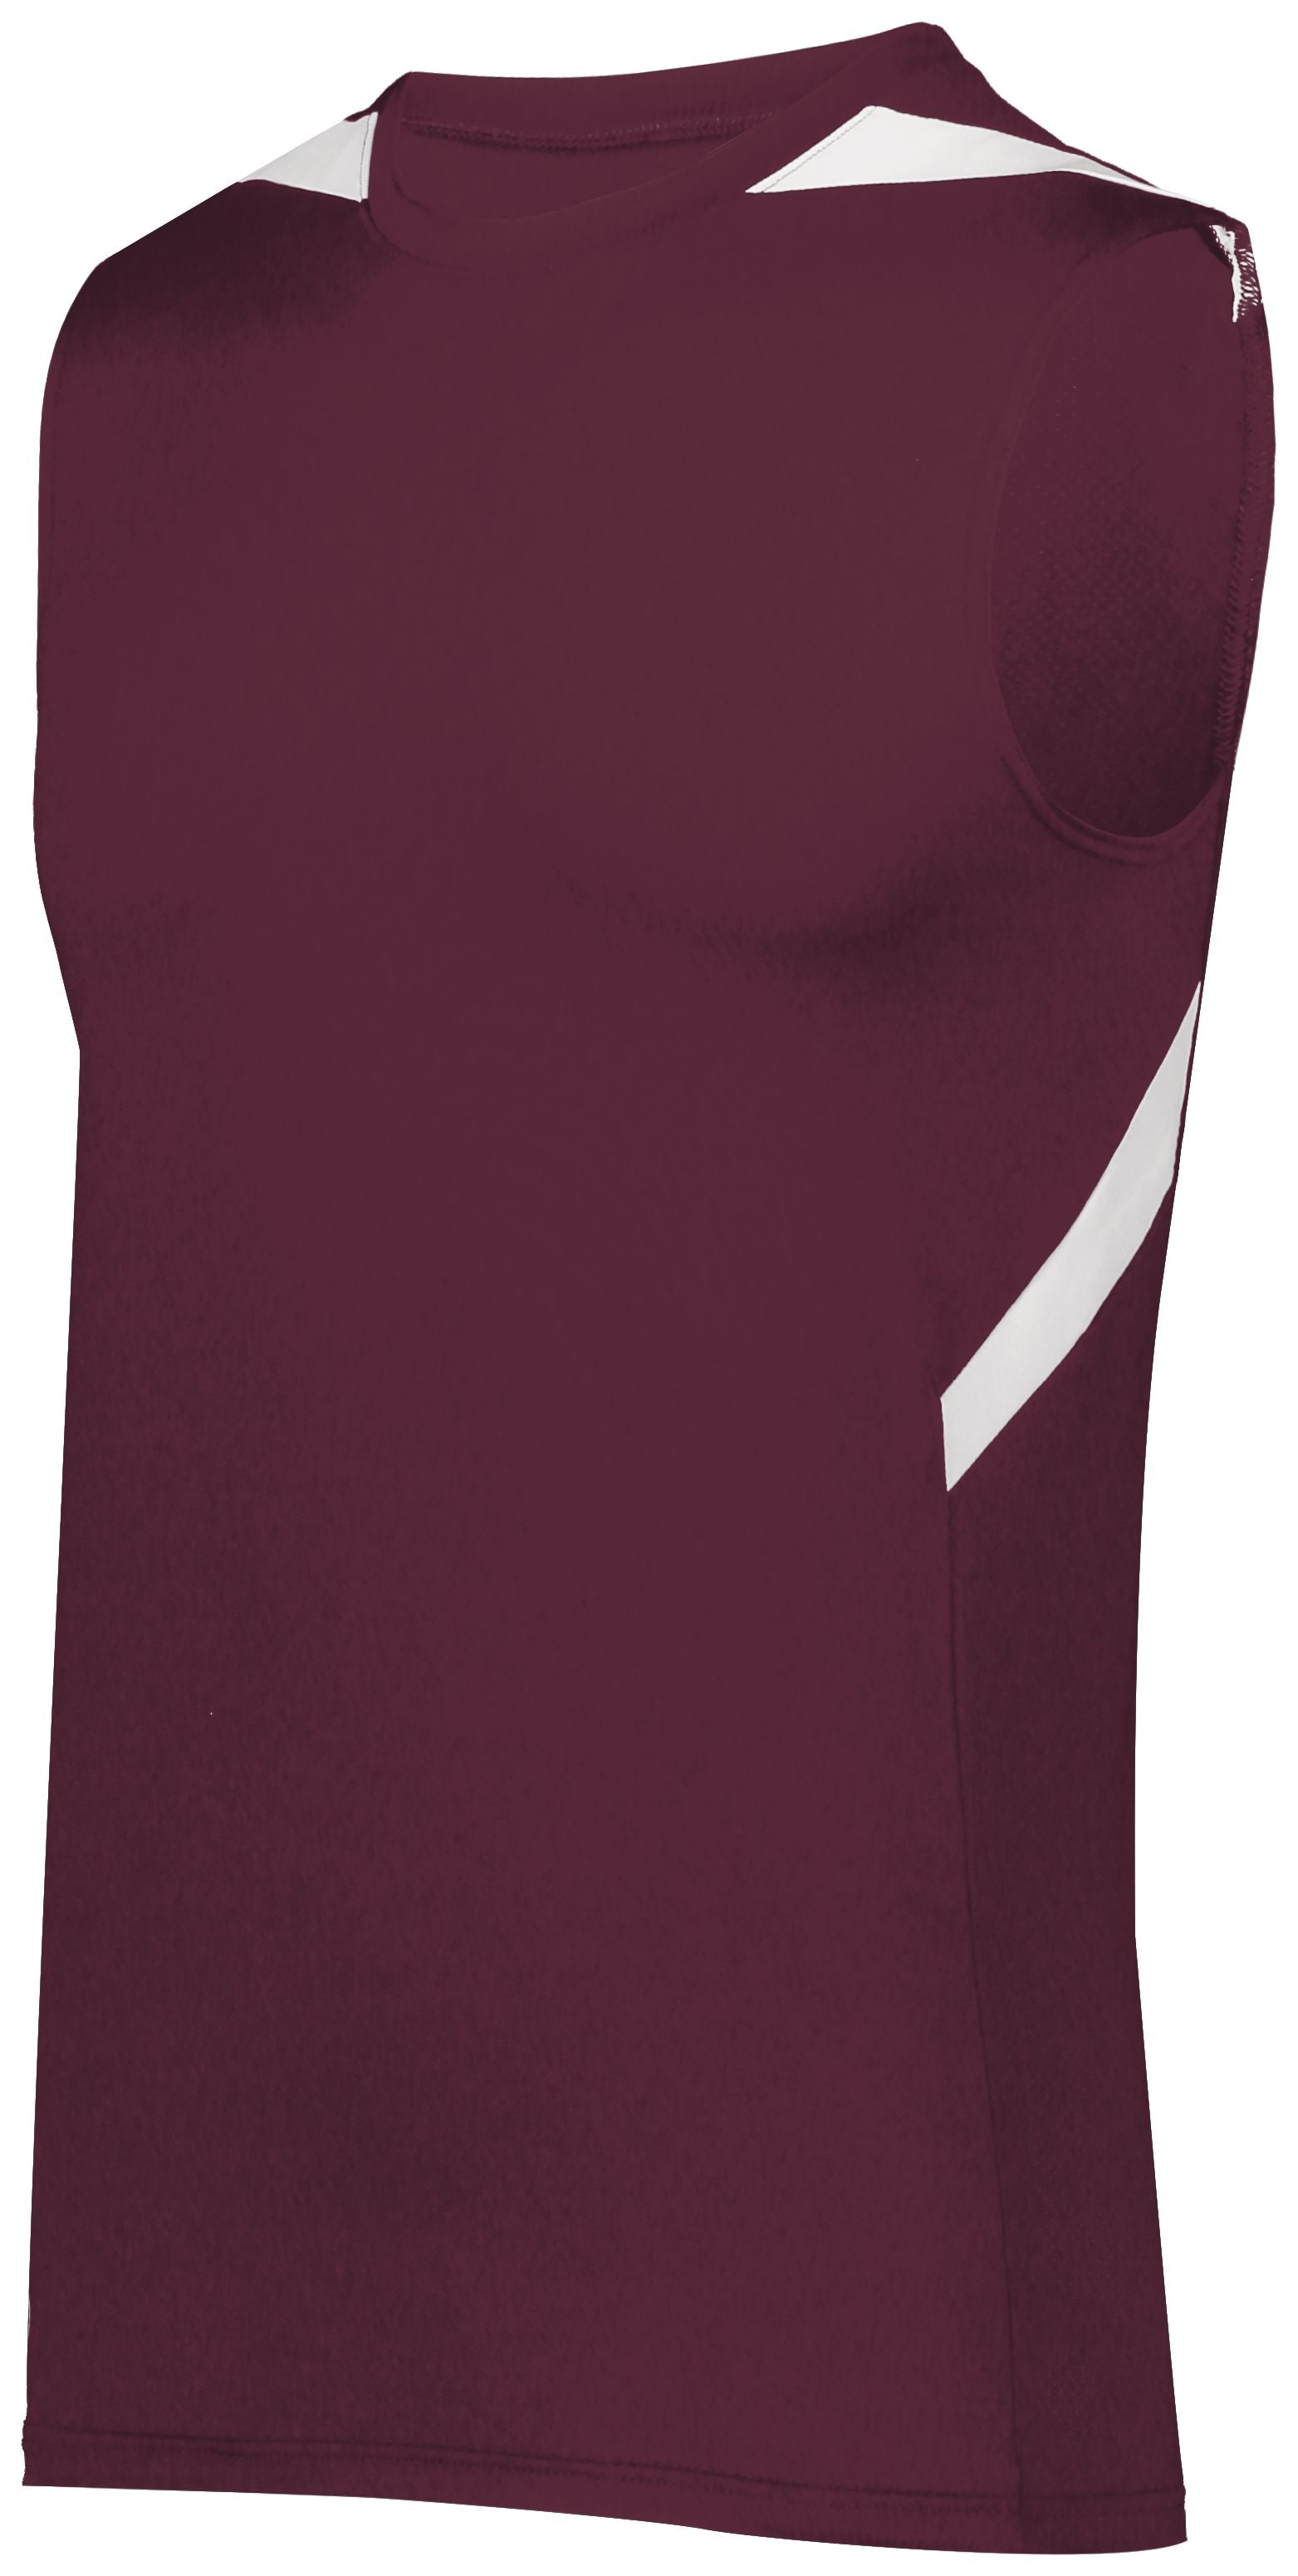 Holloway Pr Max Compression Jersey in Maroon/White  -Part of the Adult, Adult-Jersey, Track-Field, Holloway, Shirts product lines at KanaleyCreations.com